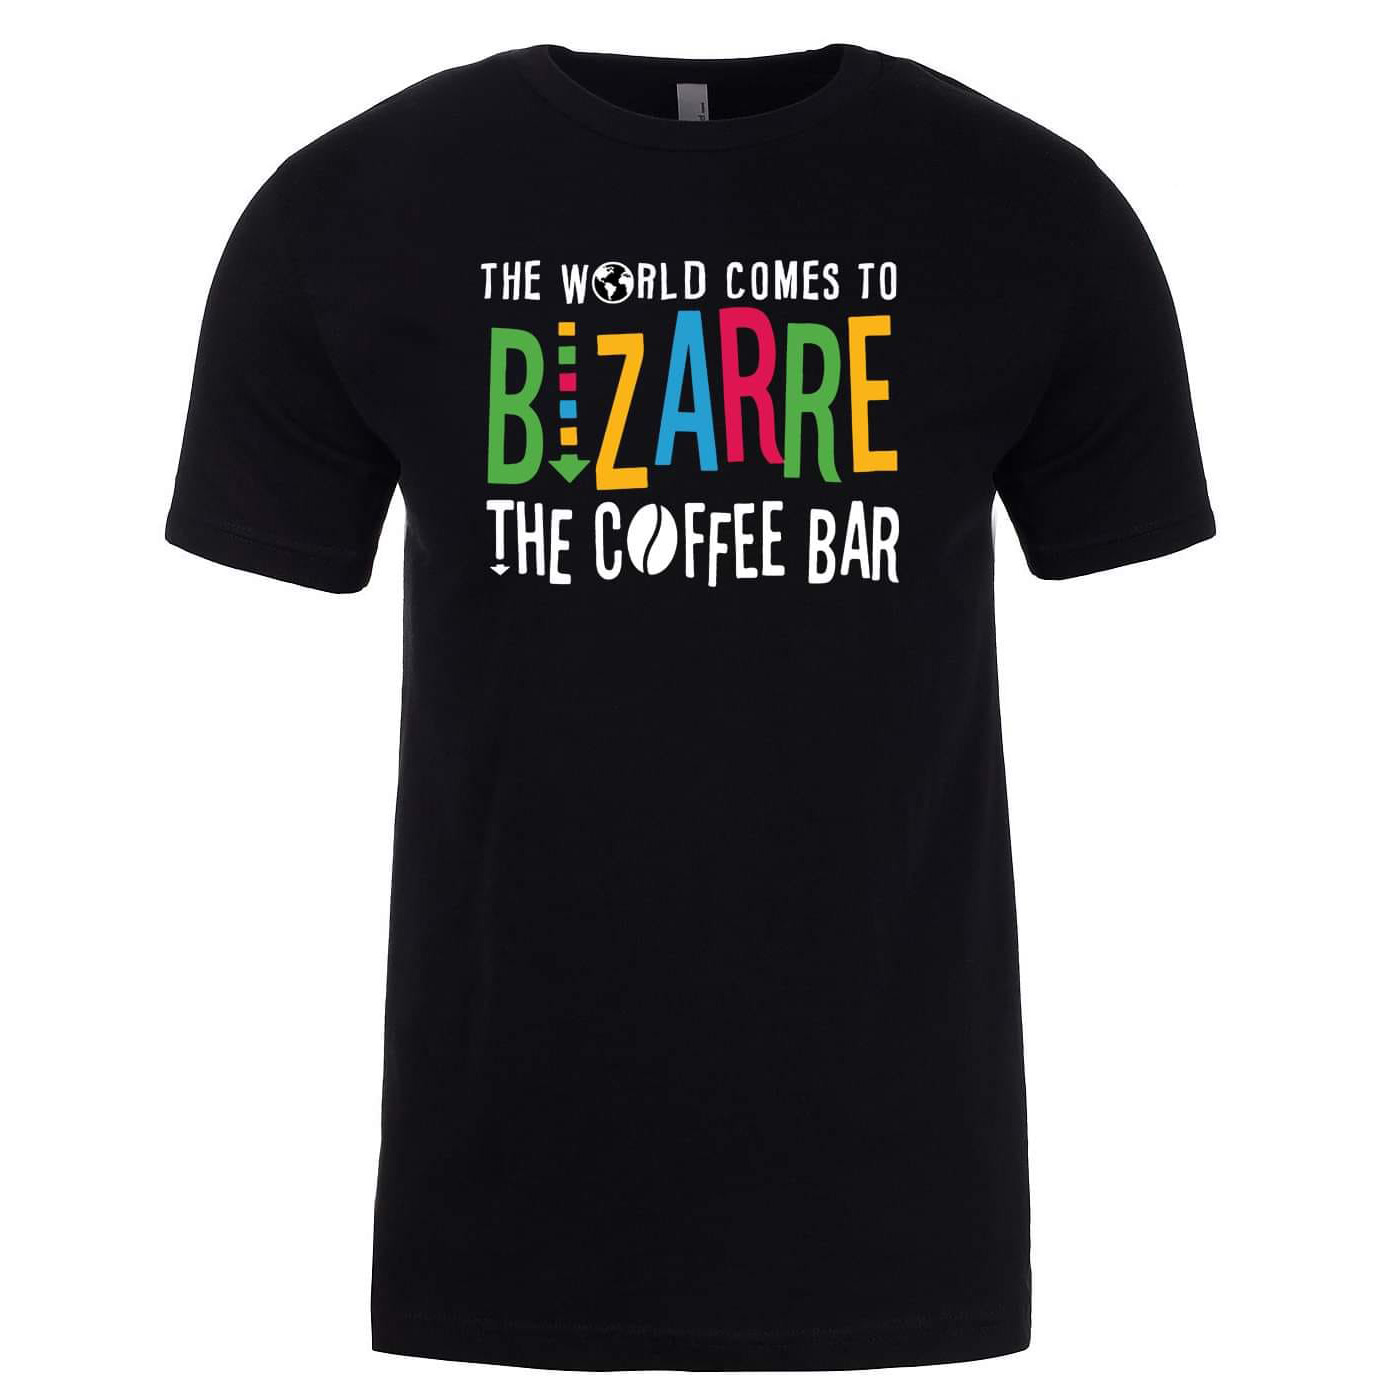 The world comes to bizarre the coffee bar shirt